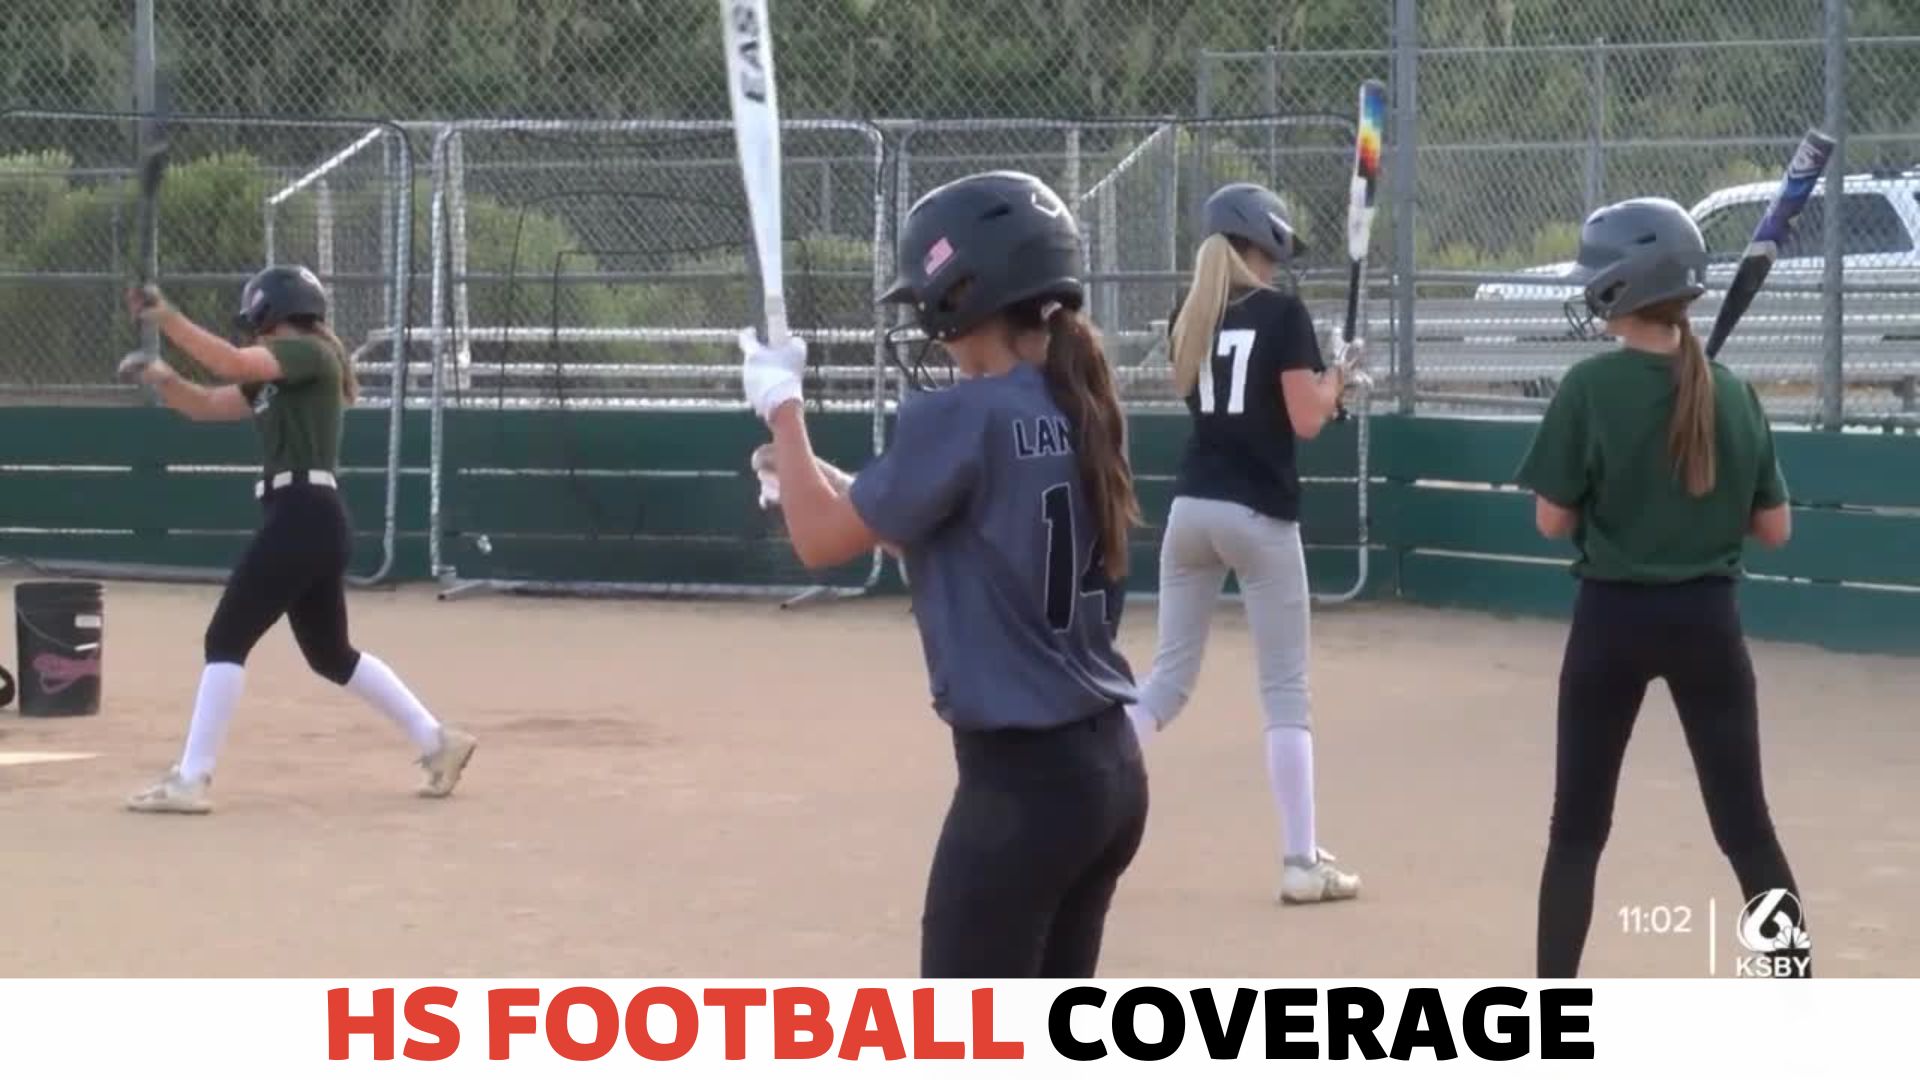 Can High School Softball Qualify for the Olympics?